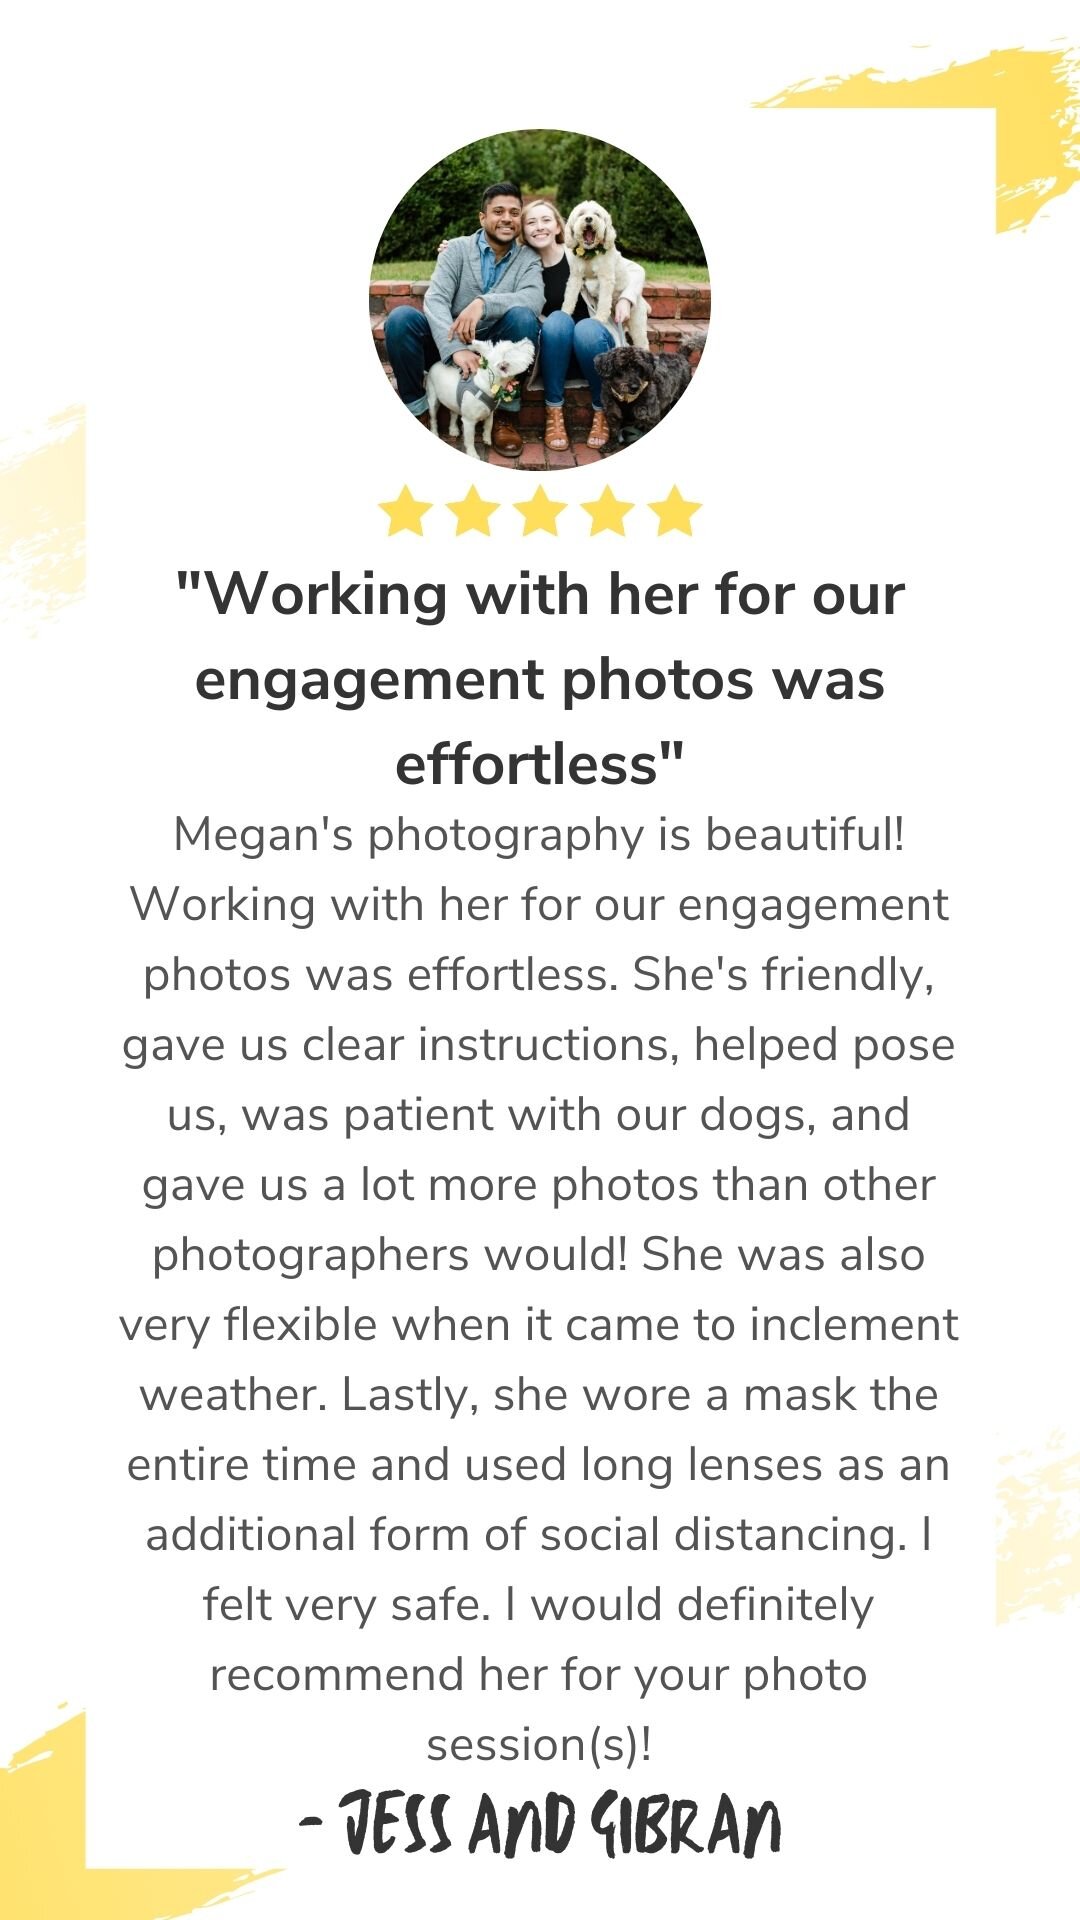 engagement_dog review - jess and gibran.jpg